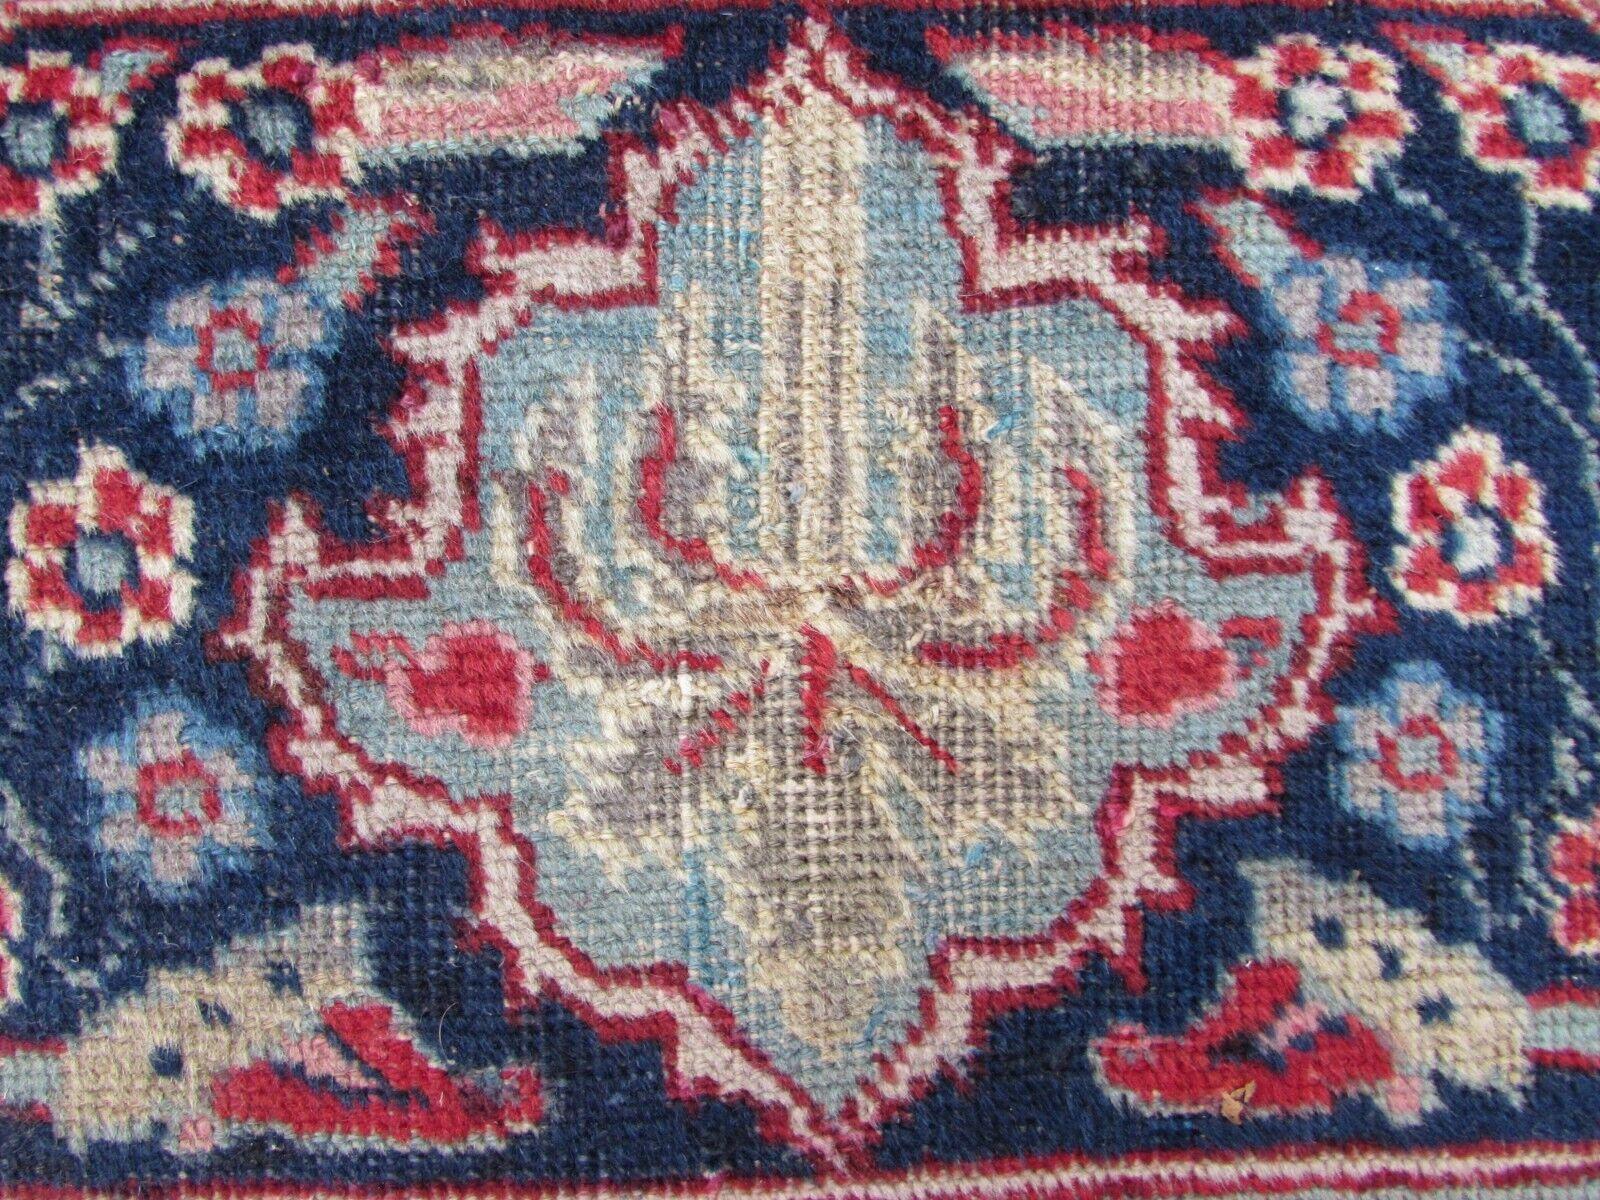 French Handmade Vintage Persian Style Kazvin Rug 9.3' x 12.3', 1970s - 1Q68 For Sale